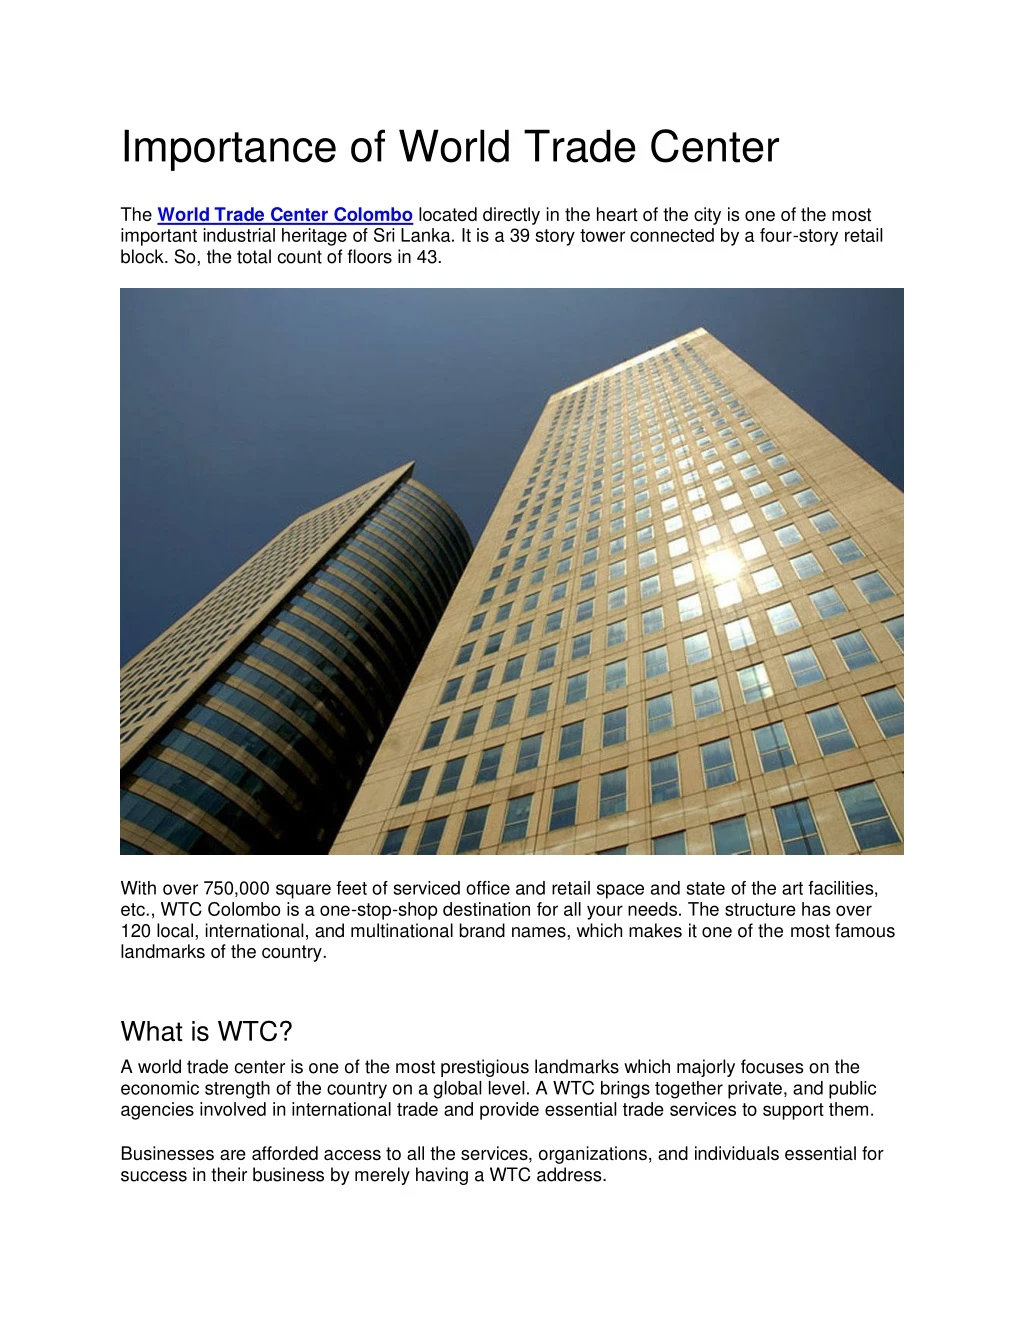 importance of world trade center the world trade